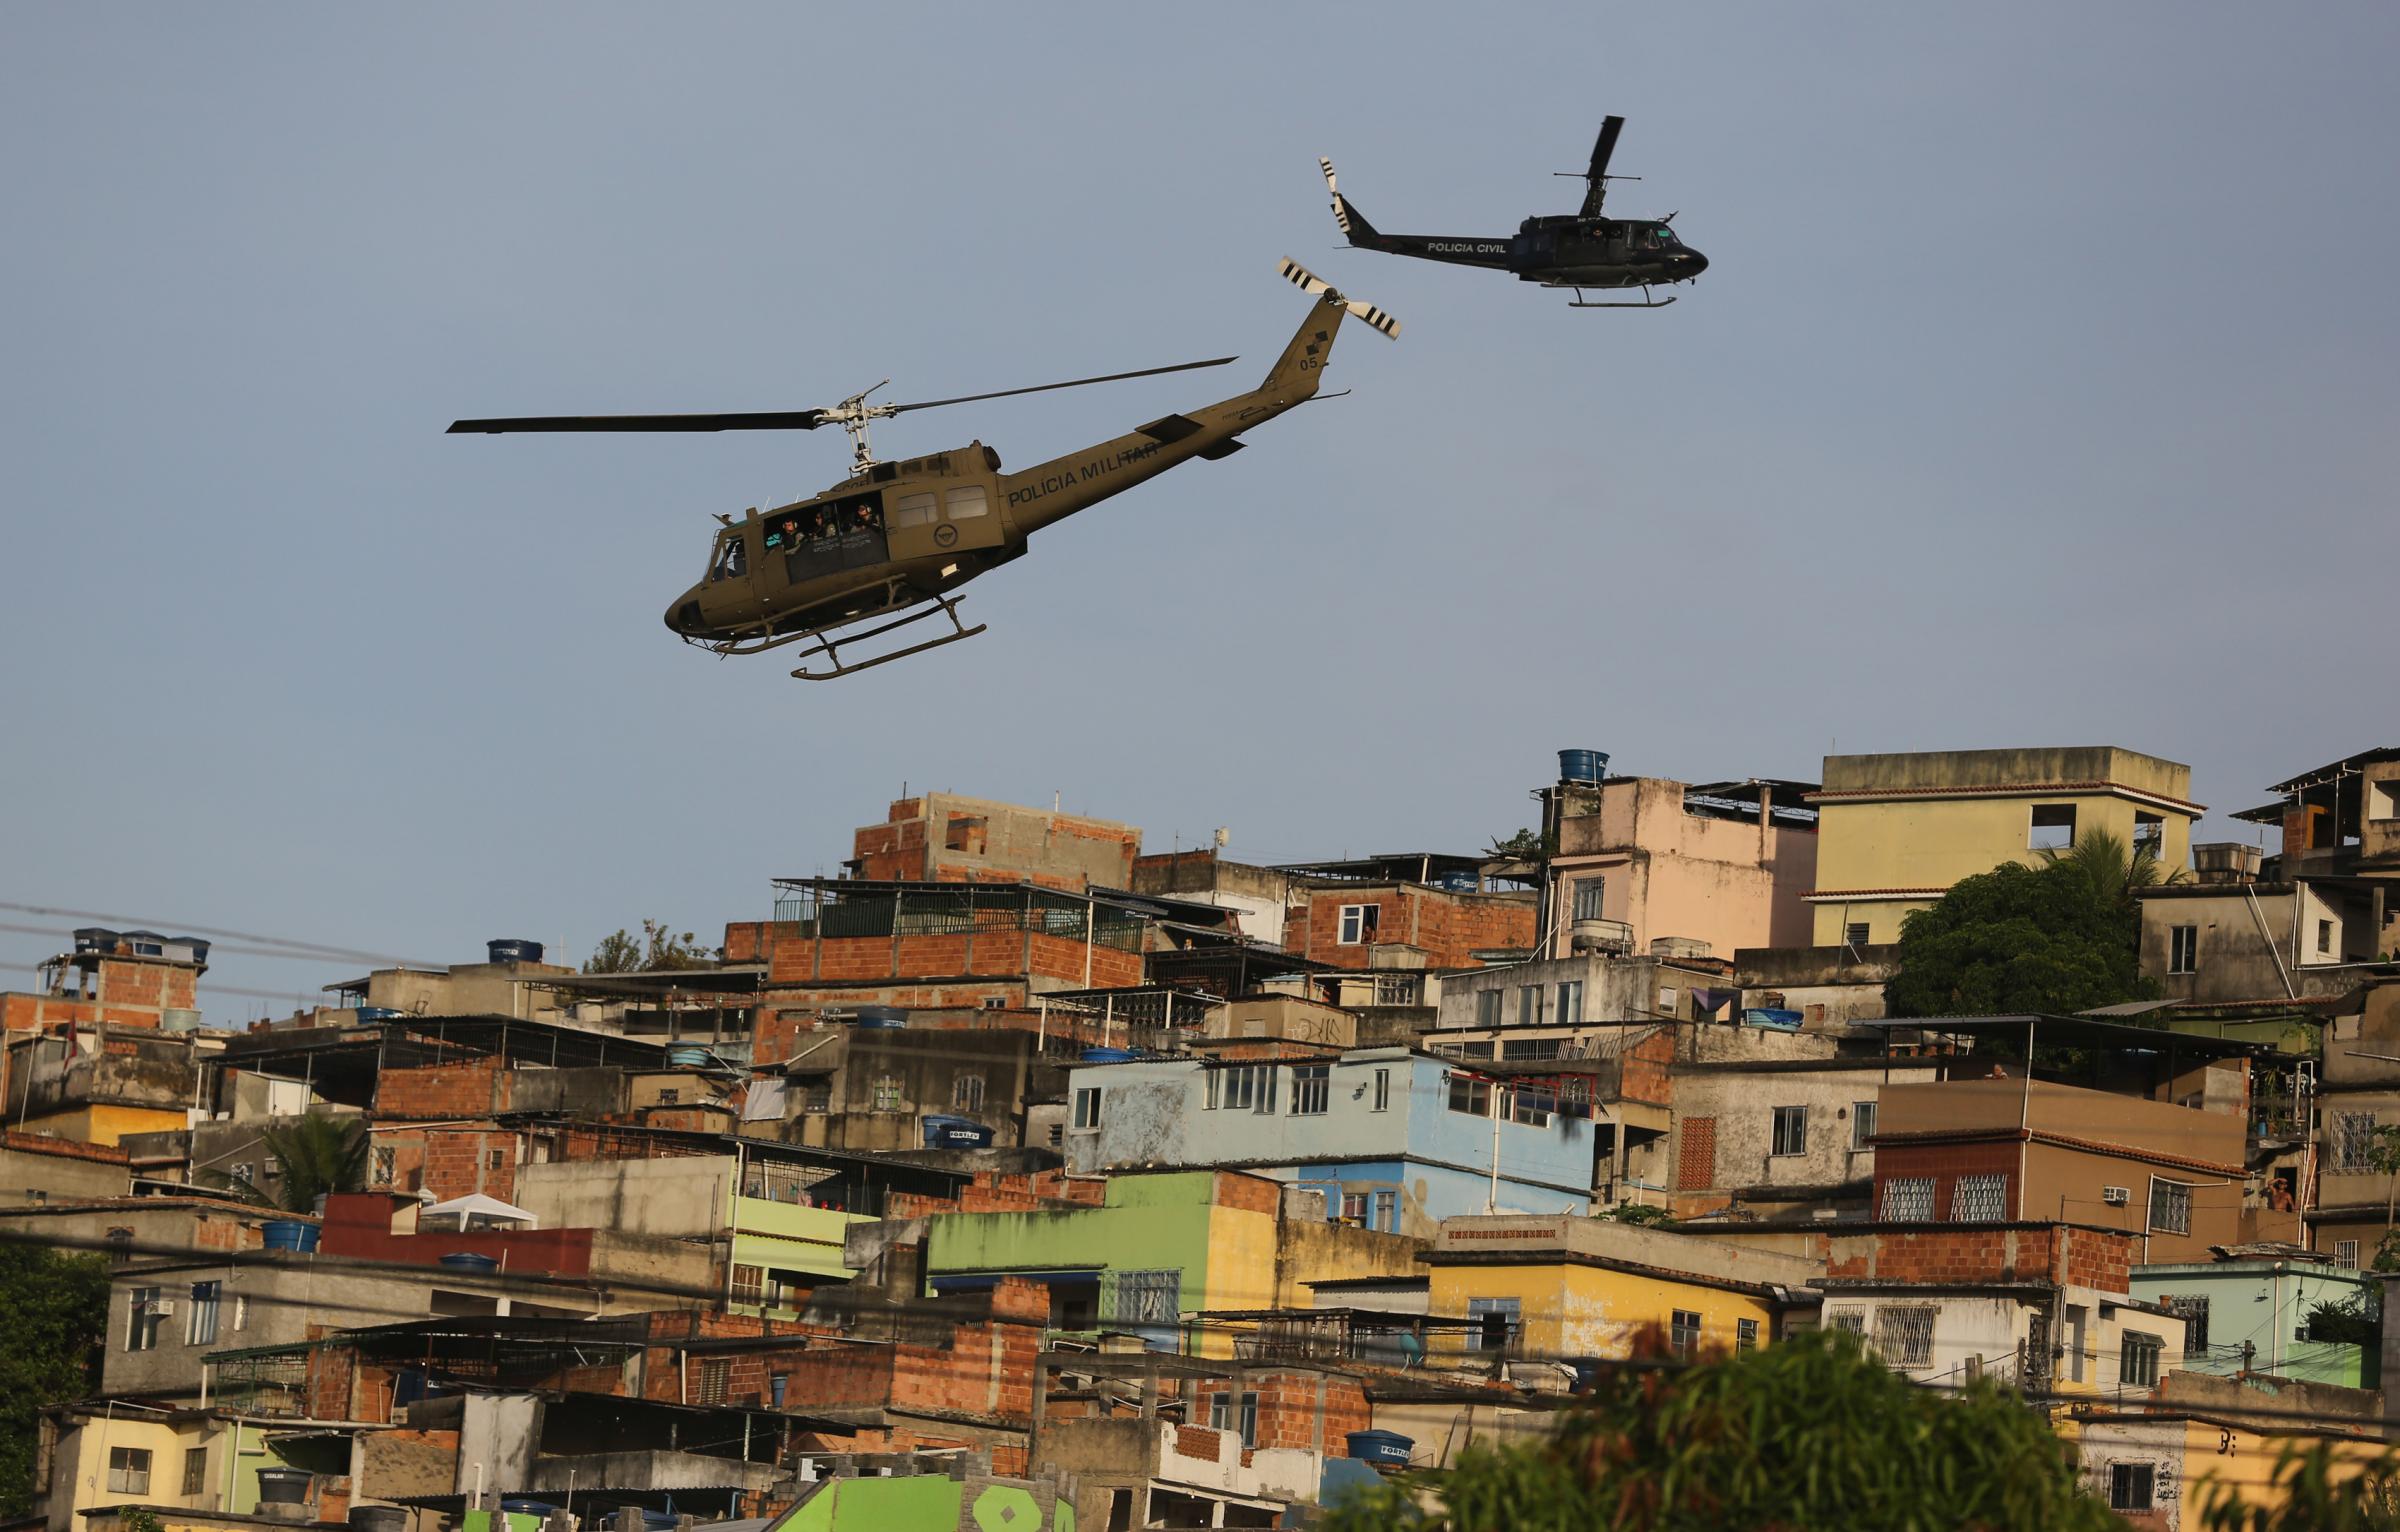 Brazil, record heat and the largest favela in the country has been without electricity for 8 days.  “Inhuman treatment”